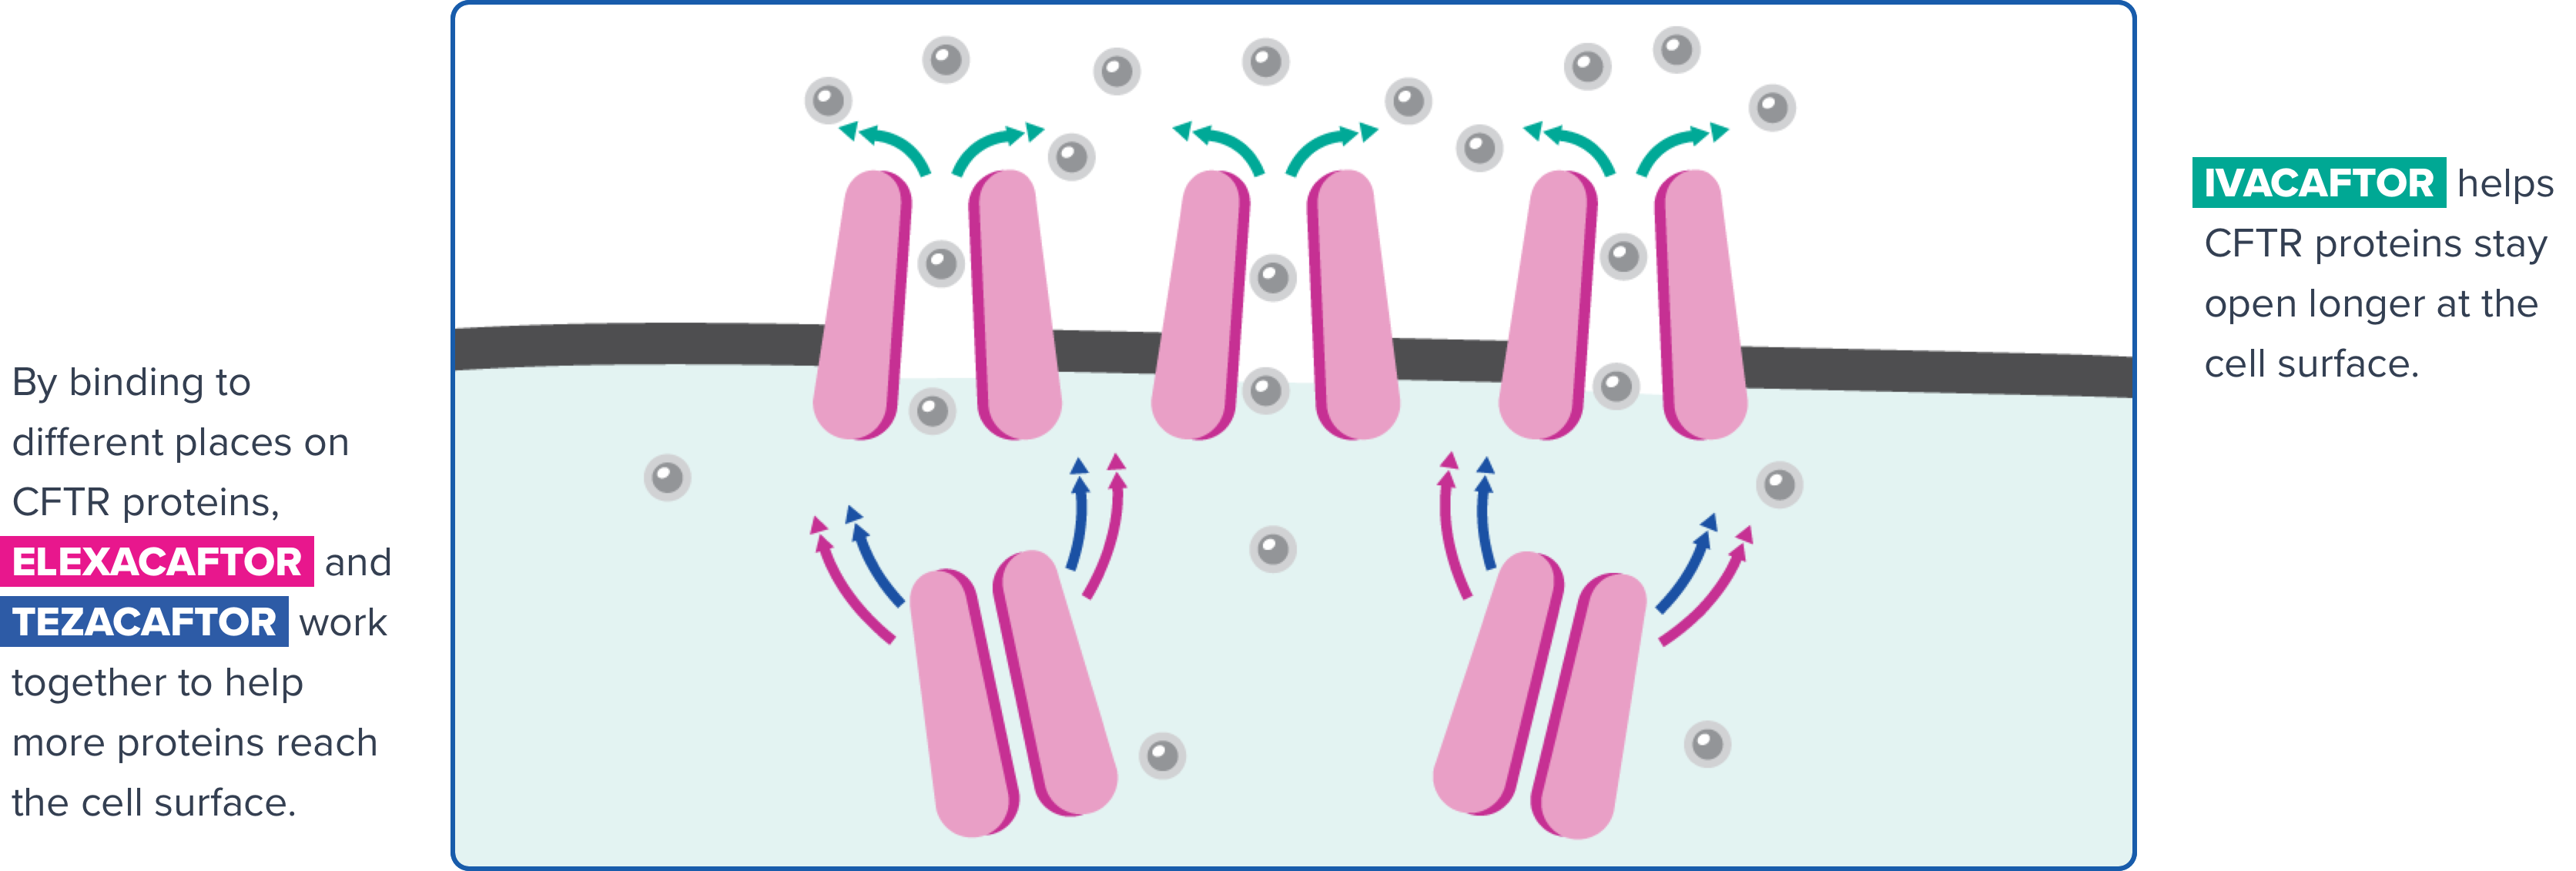 By binding to different places on CFTR proteins, ELEXACAFTOR and TEZACAFTOR work together to help more proteins reach the cell surface. IVACAFTOR helps CFTR proteins stay open longer at the cell surface.